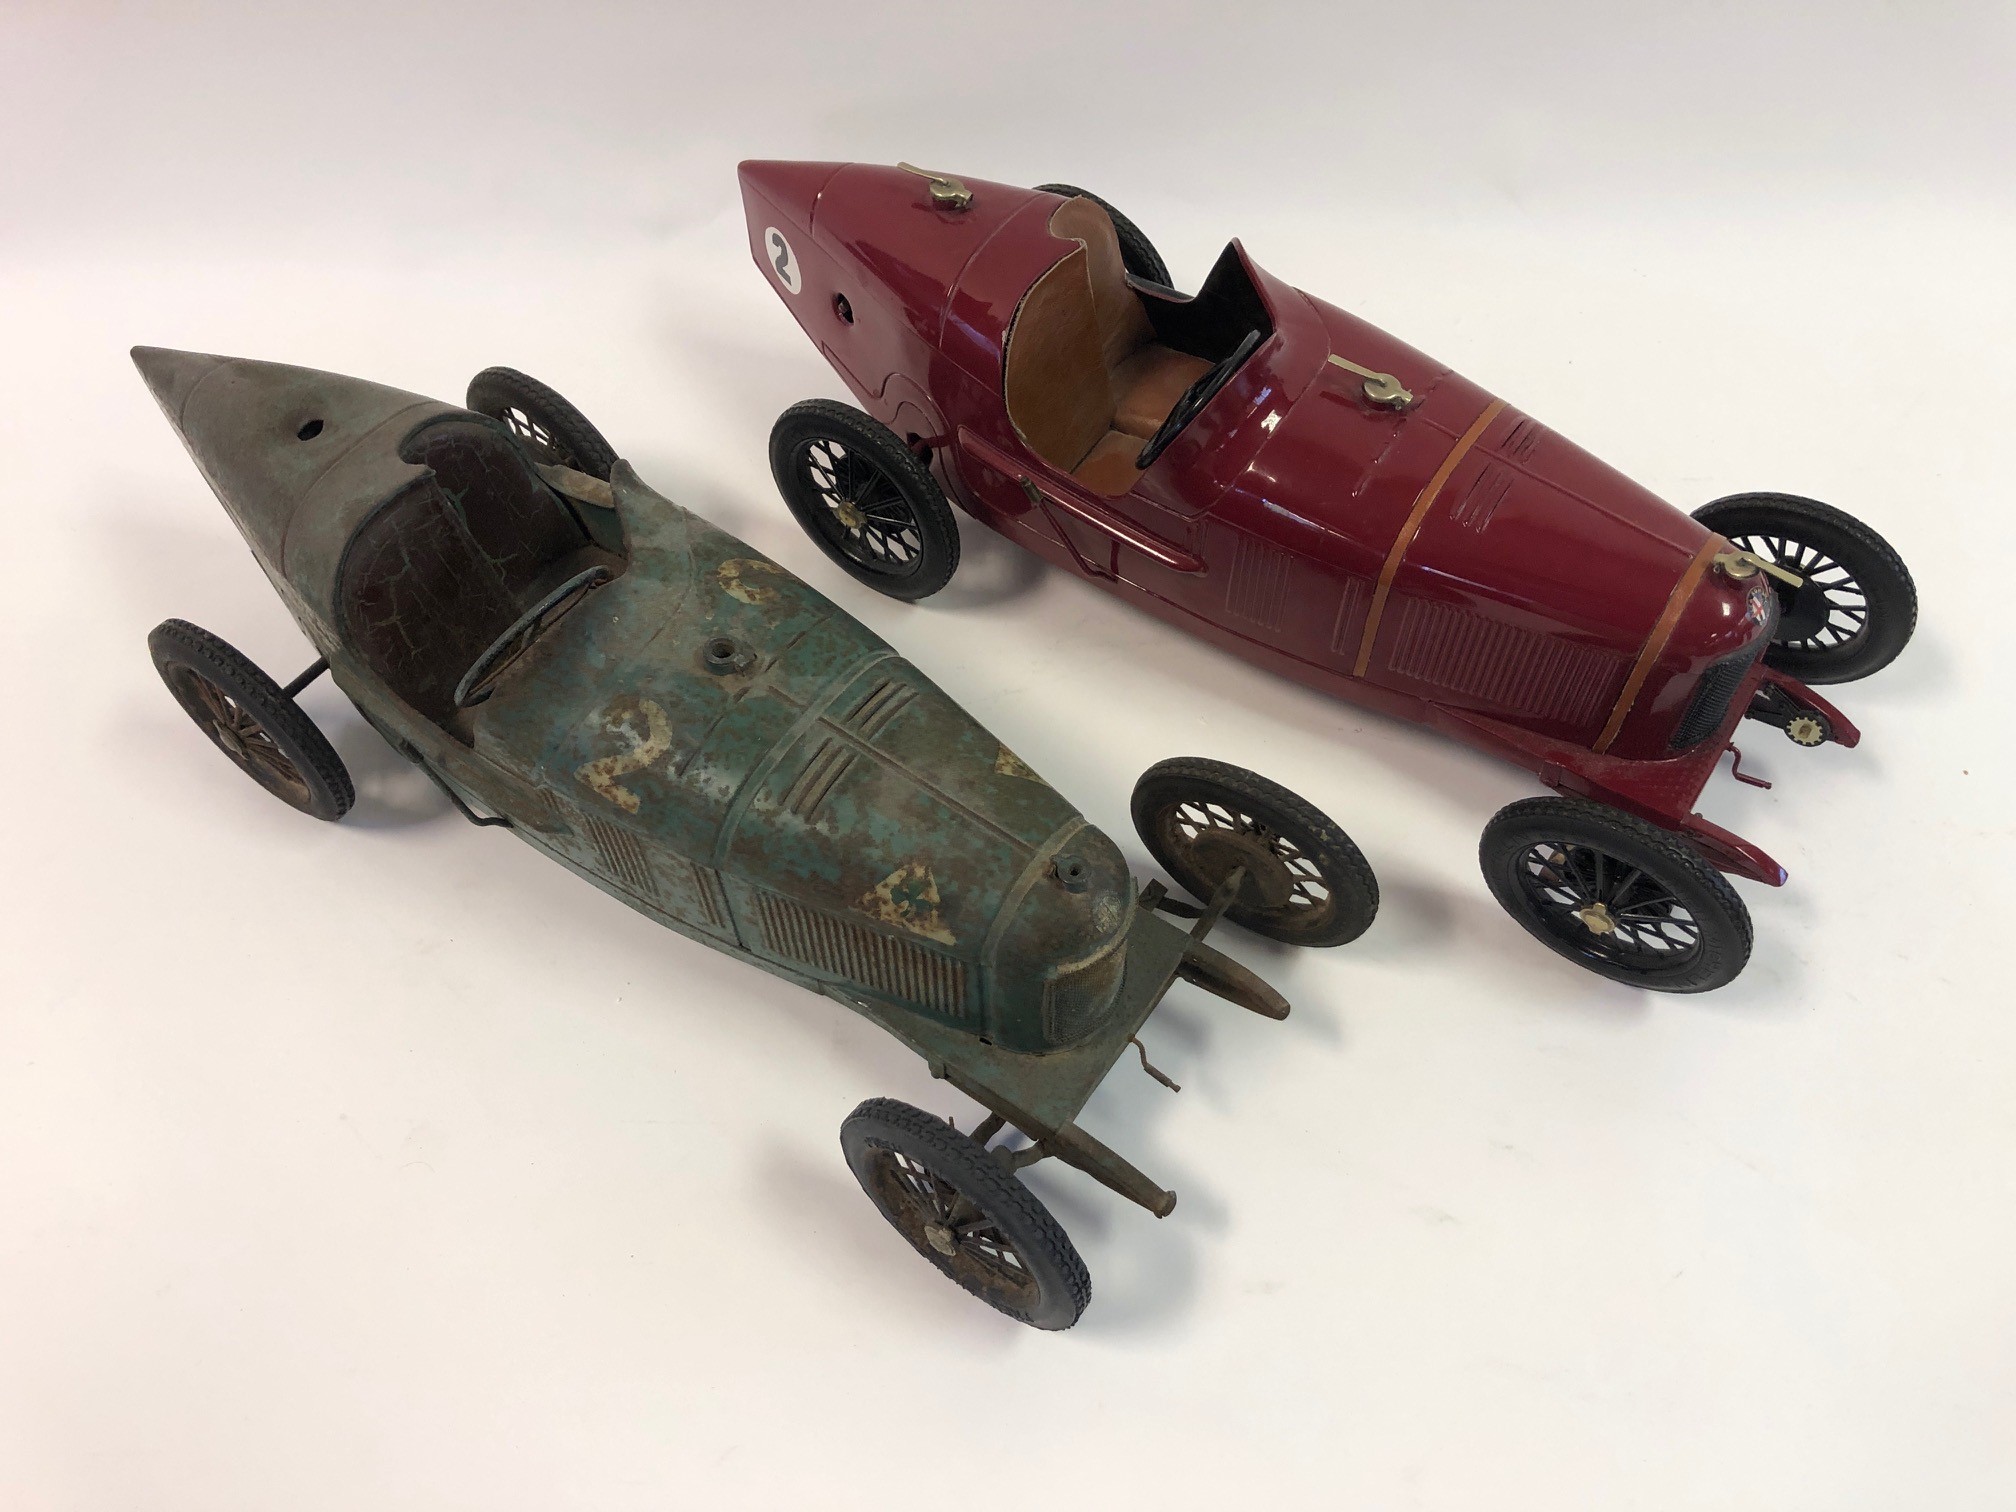 It’s no wind-up: These 1920s clockwork toys could sell for real-car money